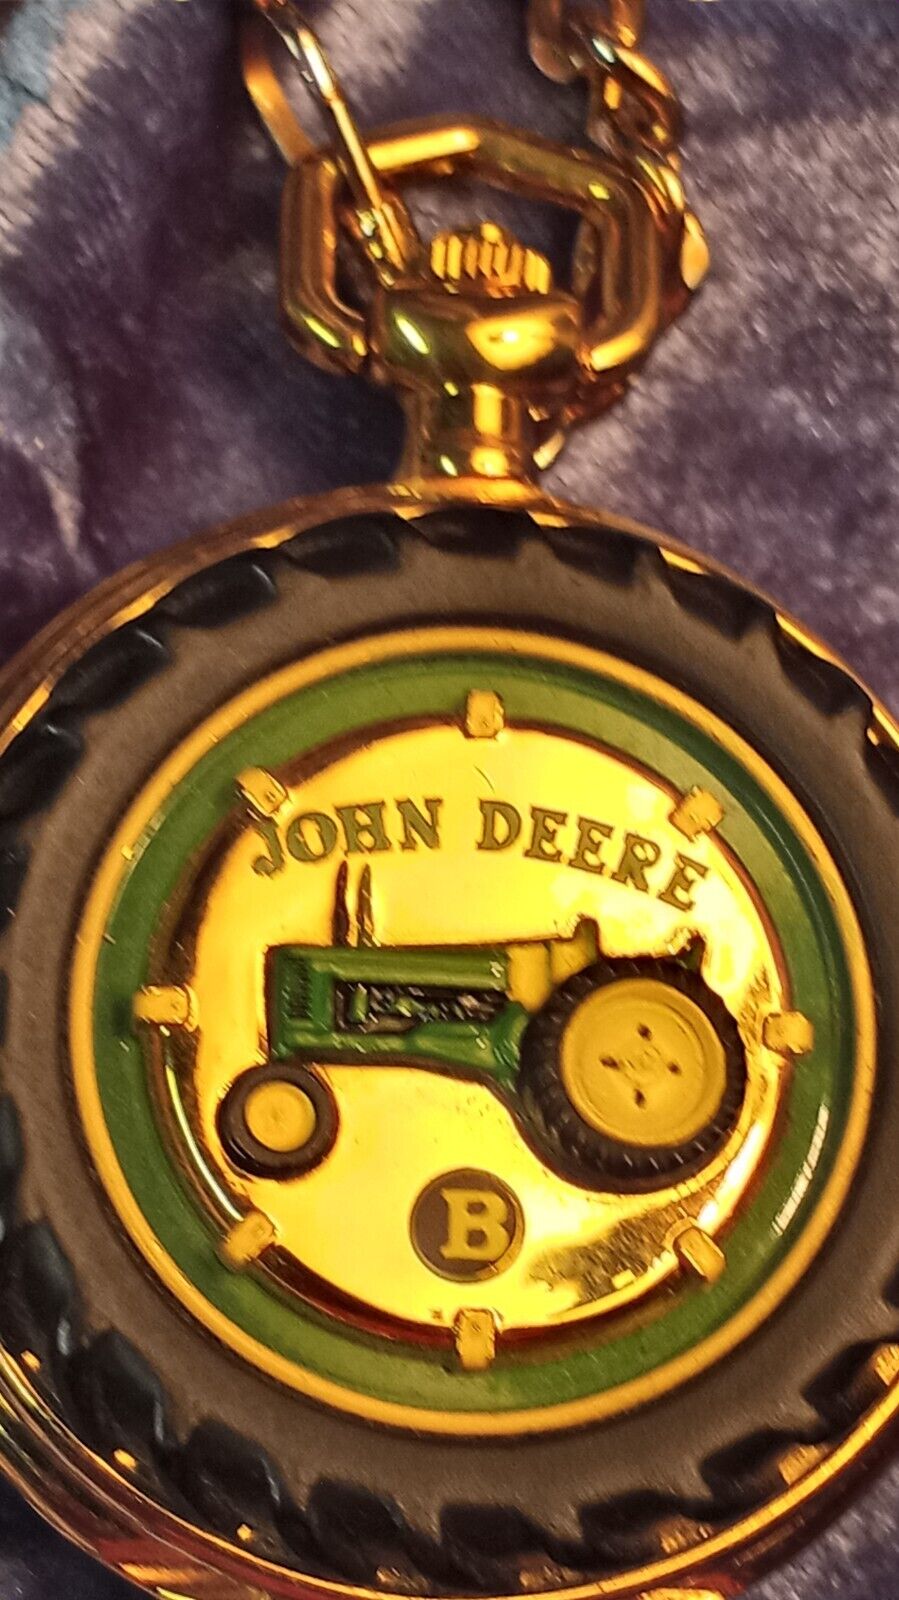 Franklin Mint John Deere Model B Tractor Pocket Watch with Case and Chain Works